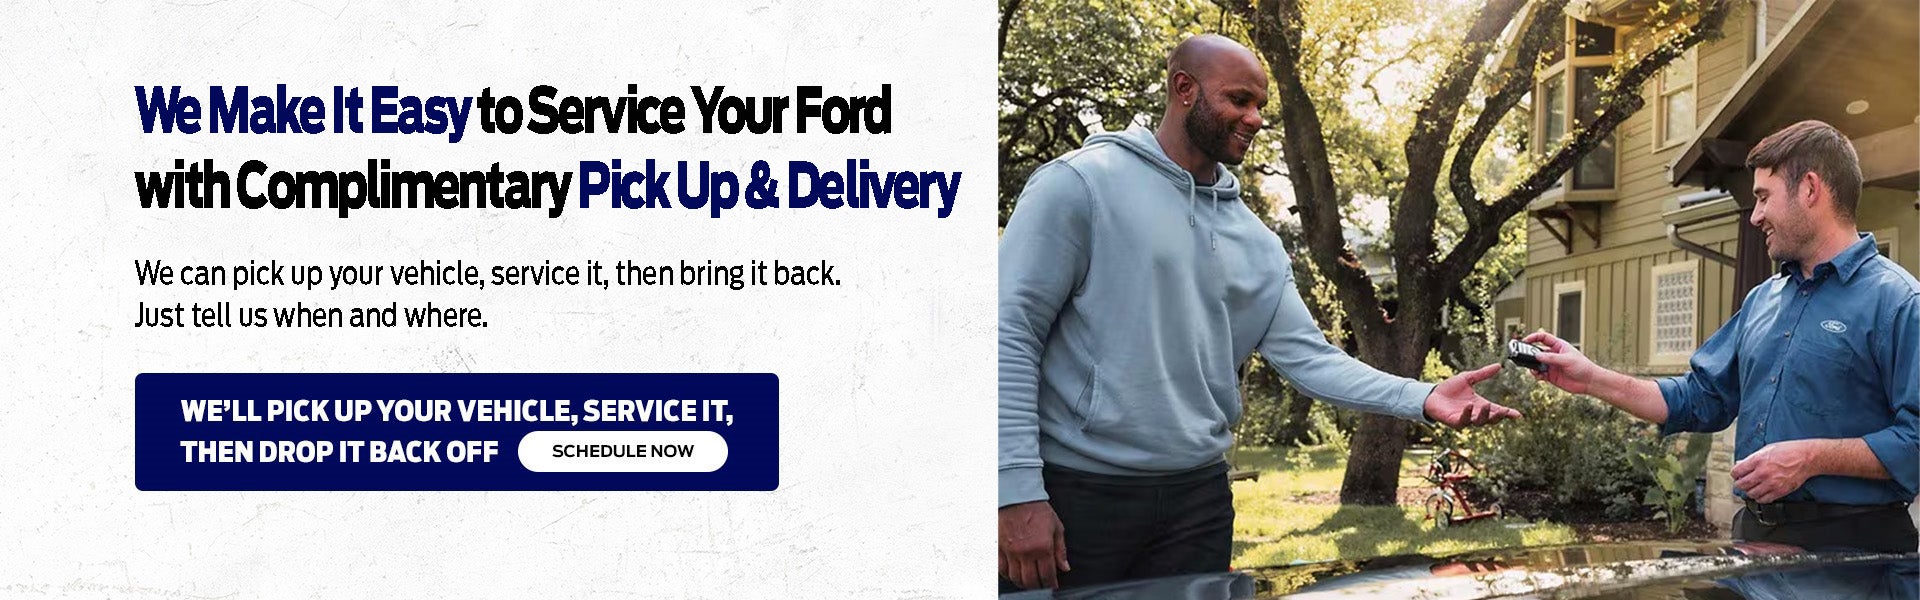 Complimentary Pick Up & Delivery 